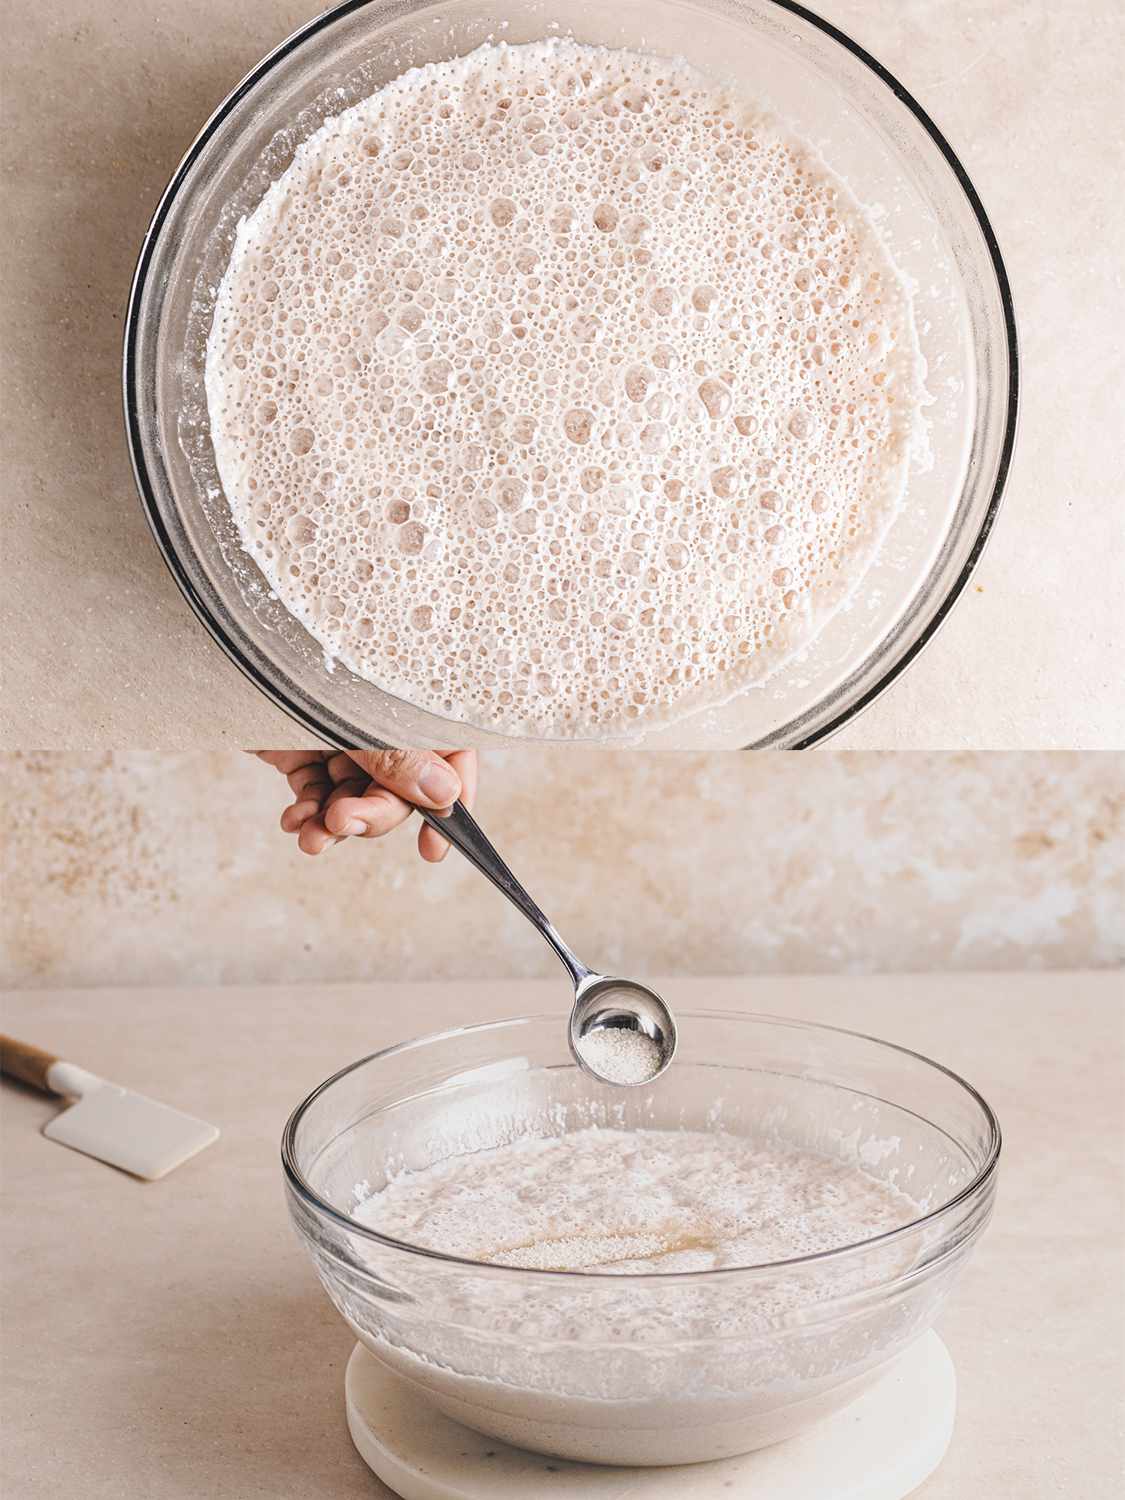 Two Image Collage. Top: Masa batter in a bowl, full of bubbles. Bottom: adding to masa batter